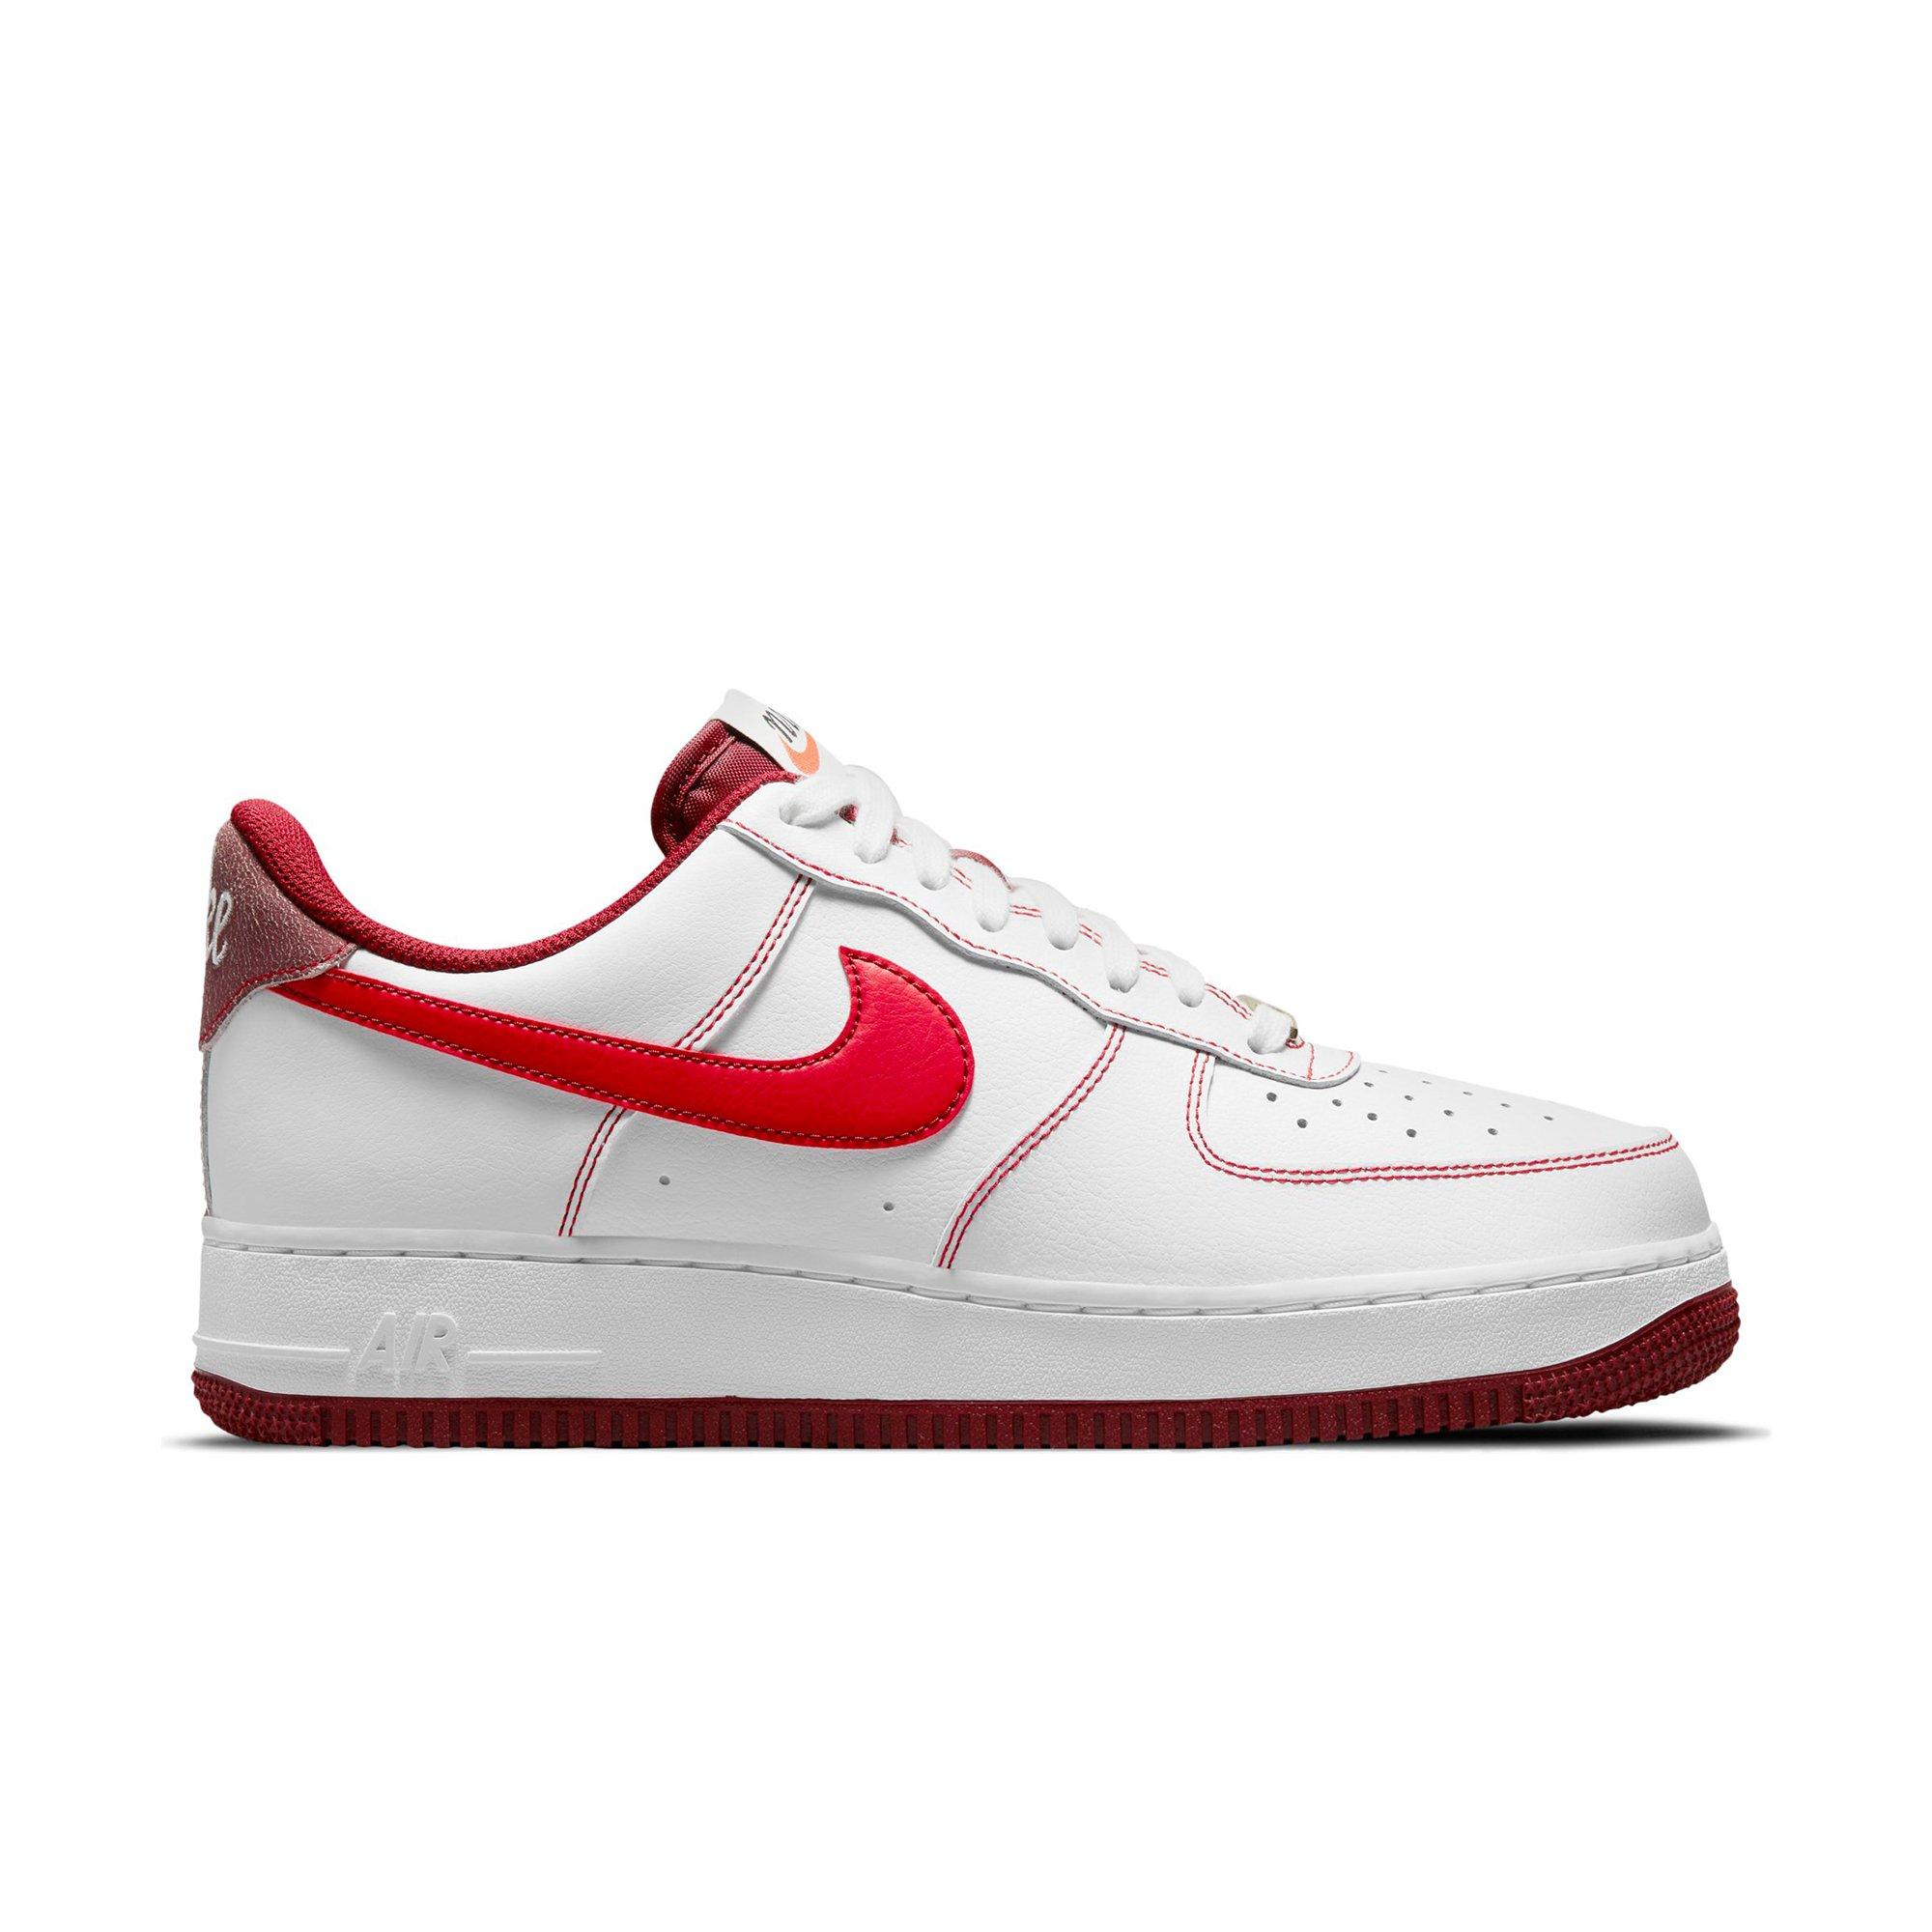 nike air force 1 university red Online Shopping mall | Find the best ...